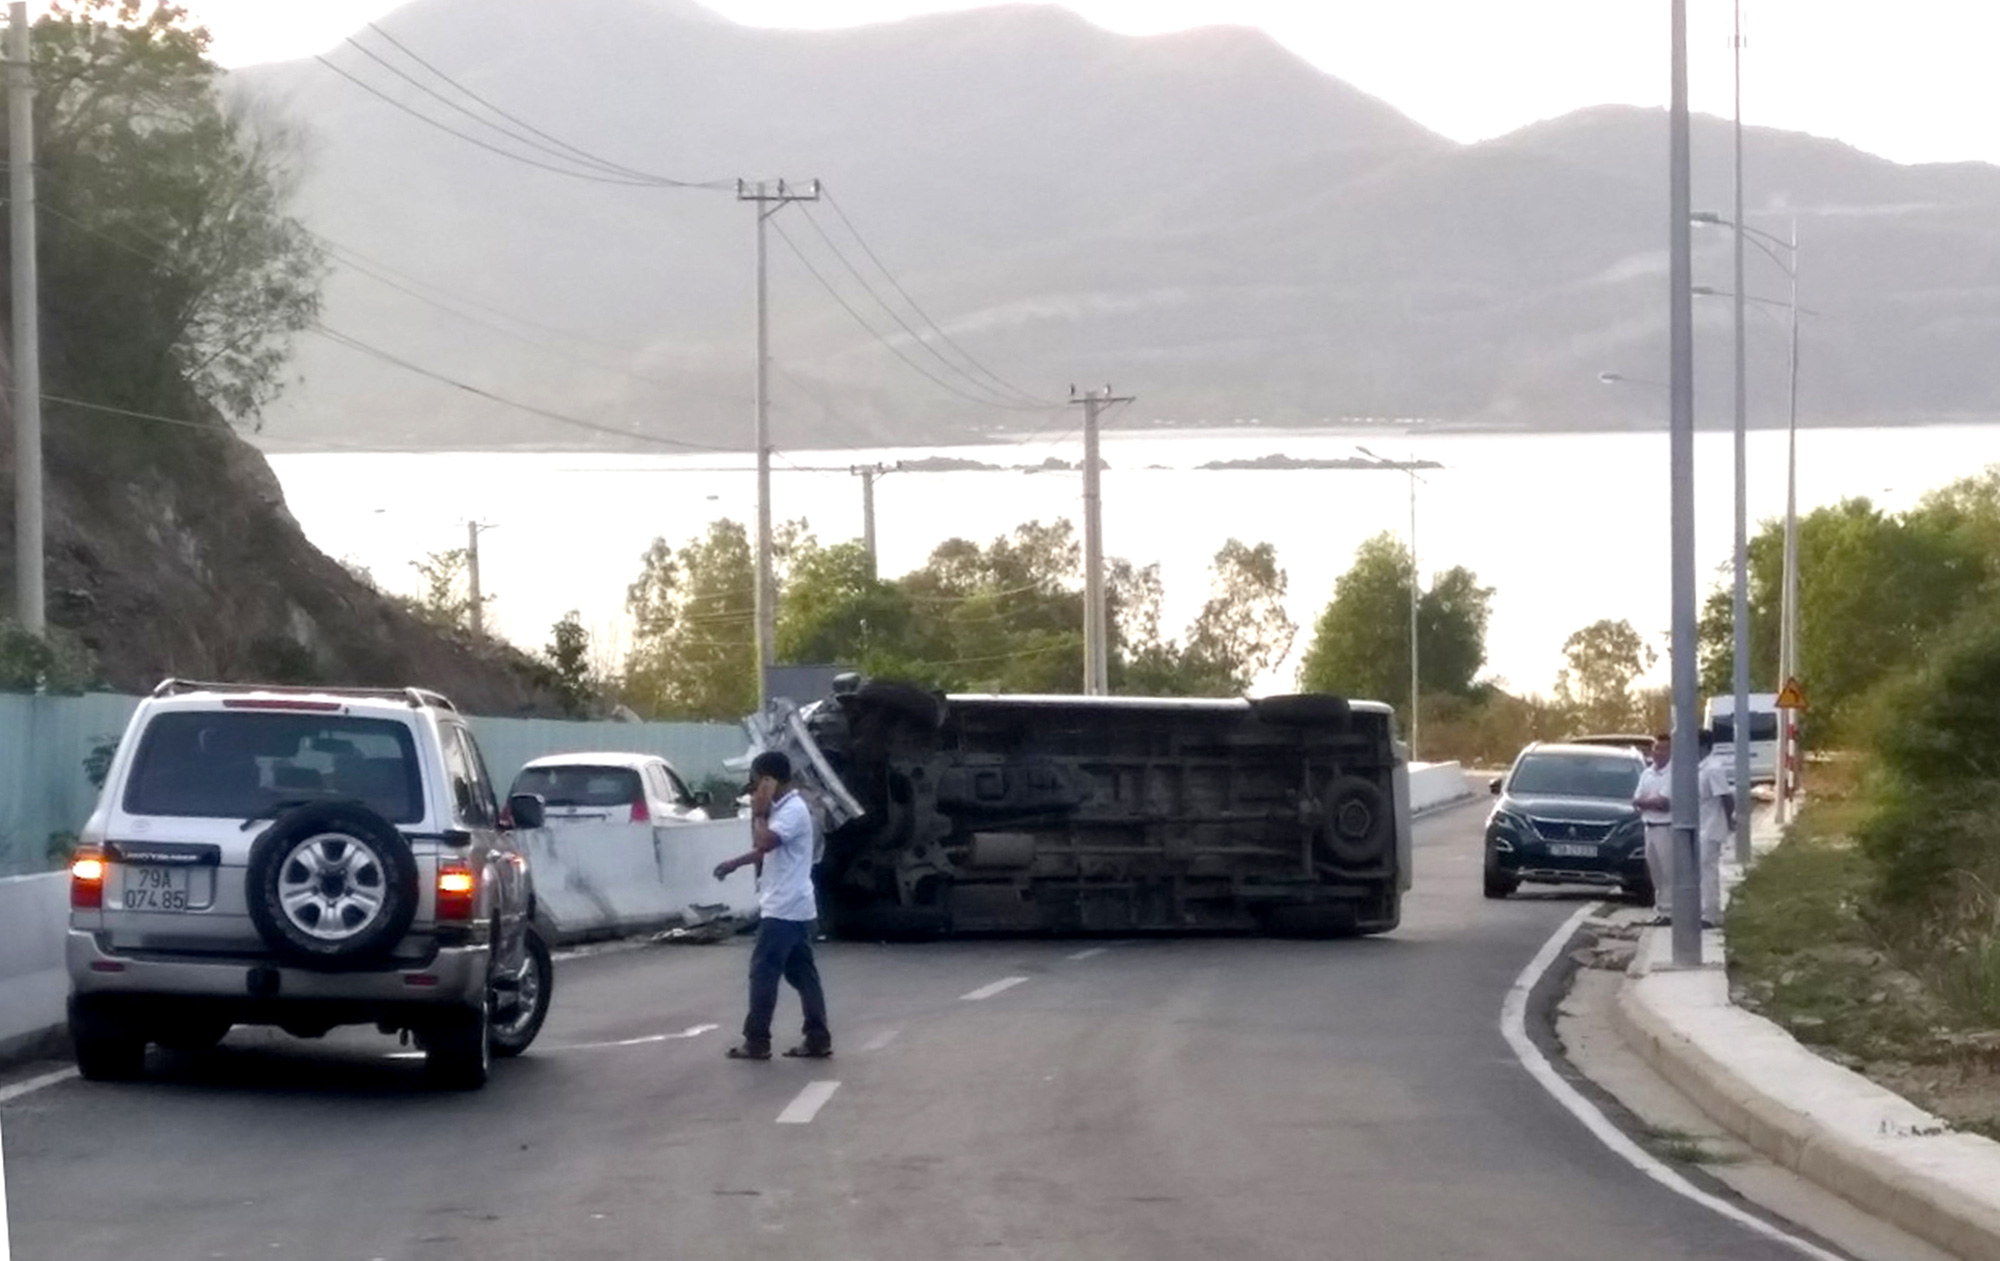 A 16-seat passenger van is on its side after hitting a concrete divider on the Cu Hin mountain pass in Nha Trang City, Khanh Hoa Province, Vietnam, August 30, 2020. Photo: Phan Song Ngan / Tuoi Tre